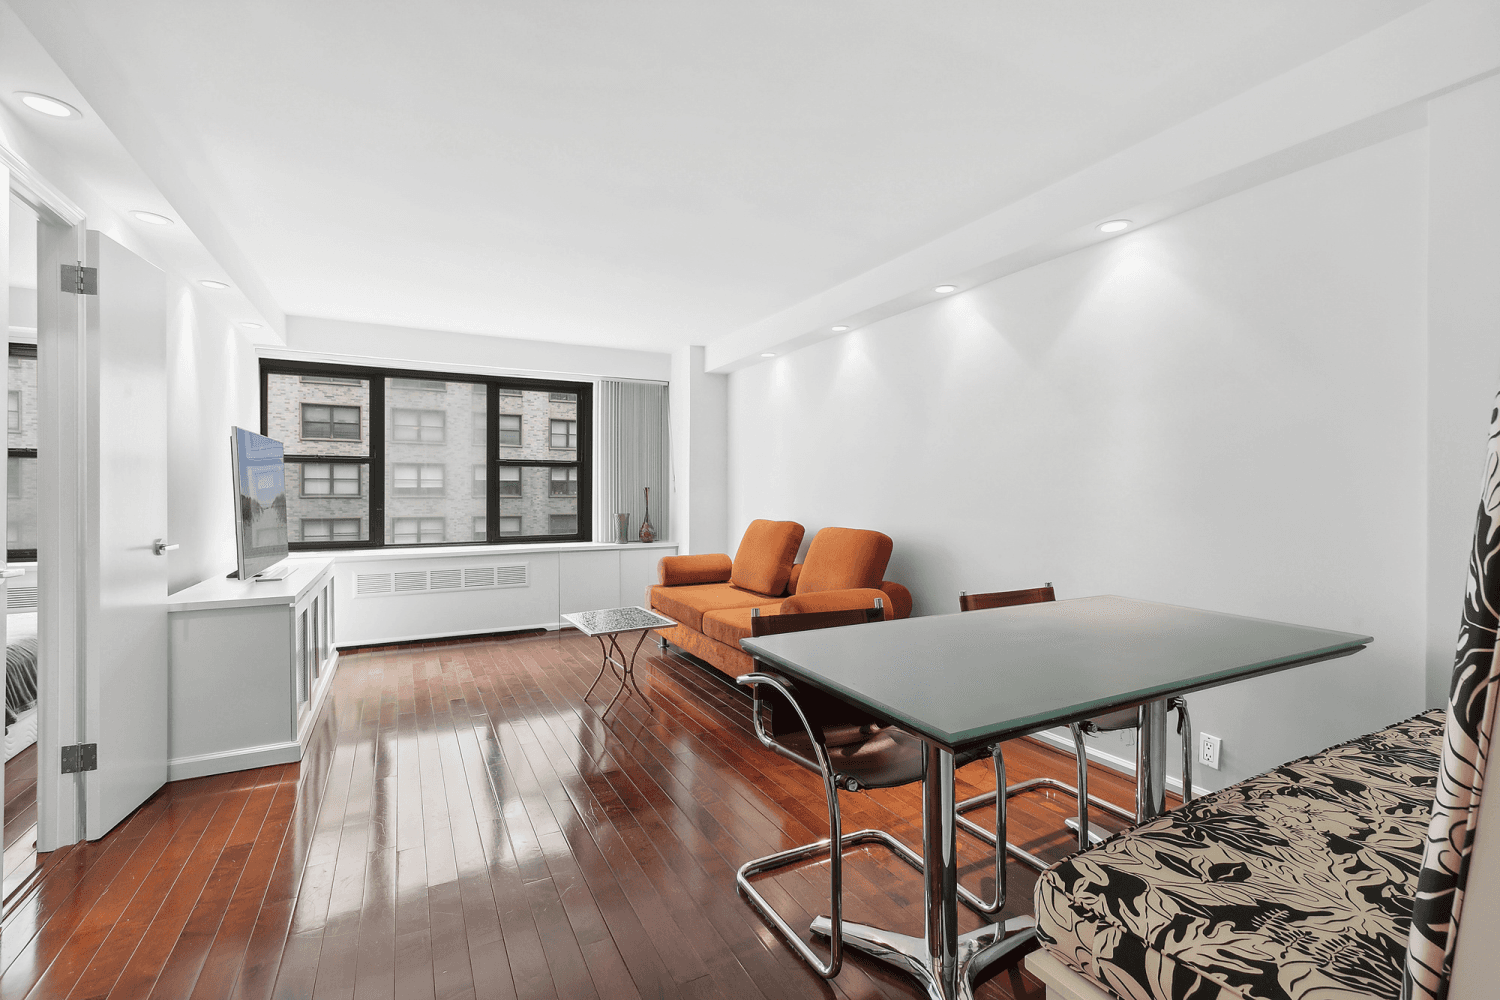 220 East 57th Street is centrally located and residents enjoy all conveniences of living in midtown.